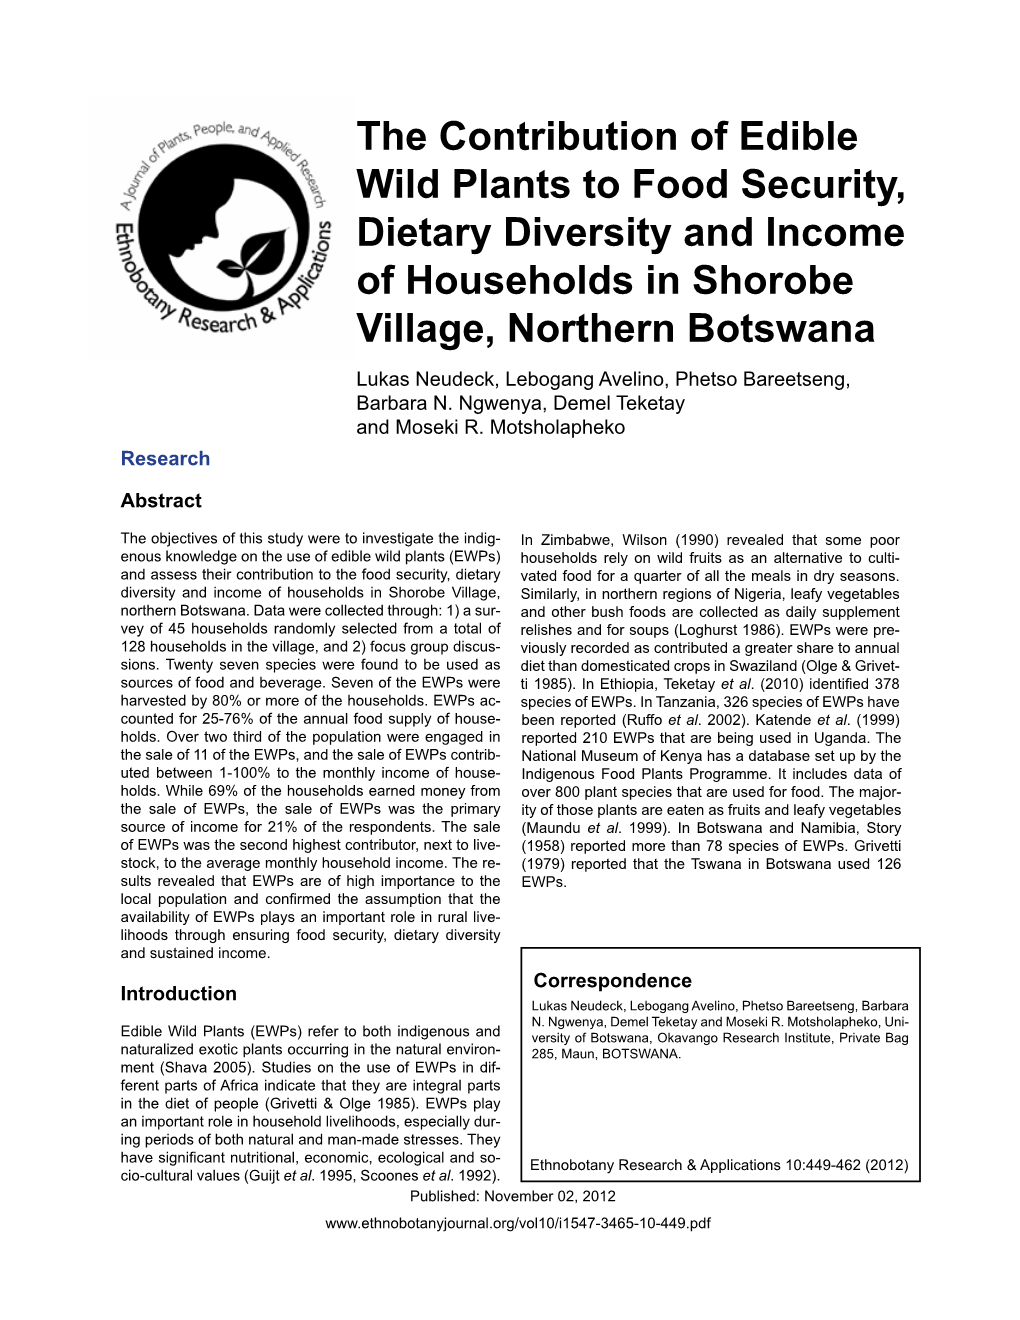 The Contribution of Edible Wild Plants to Food Security, Dietary Diversity